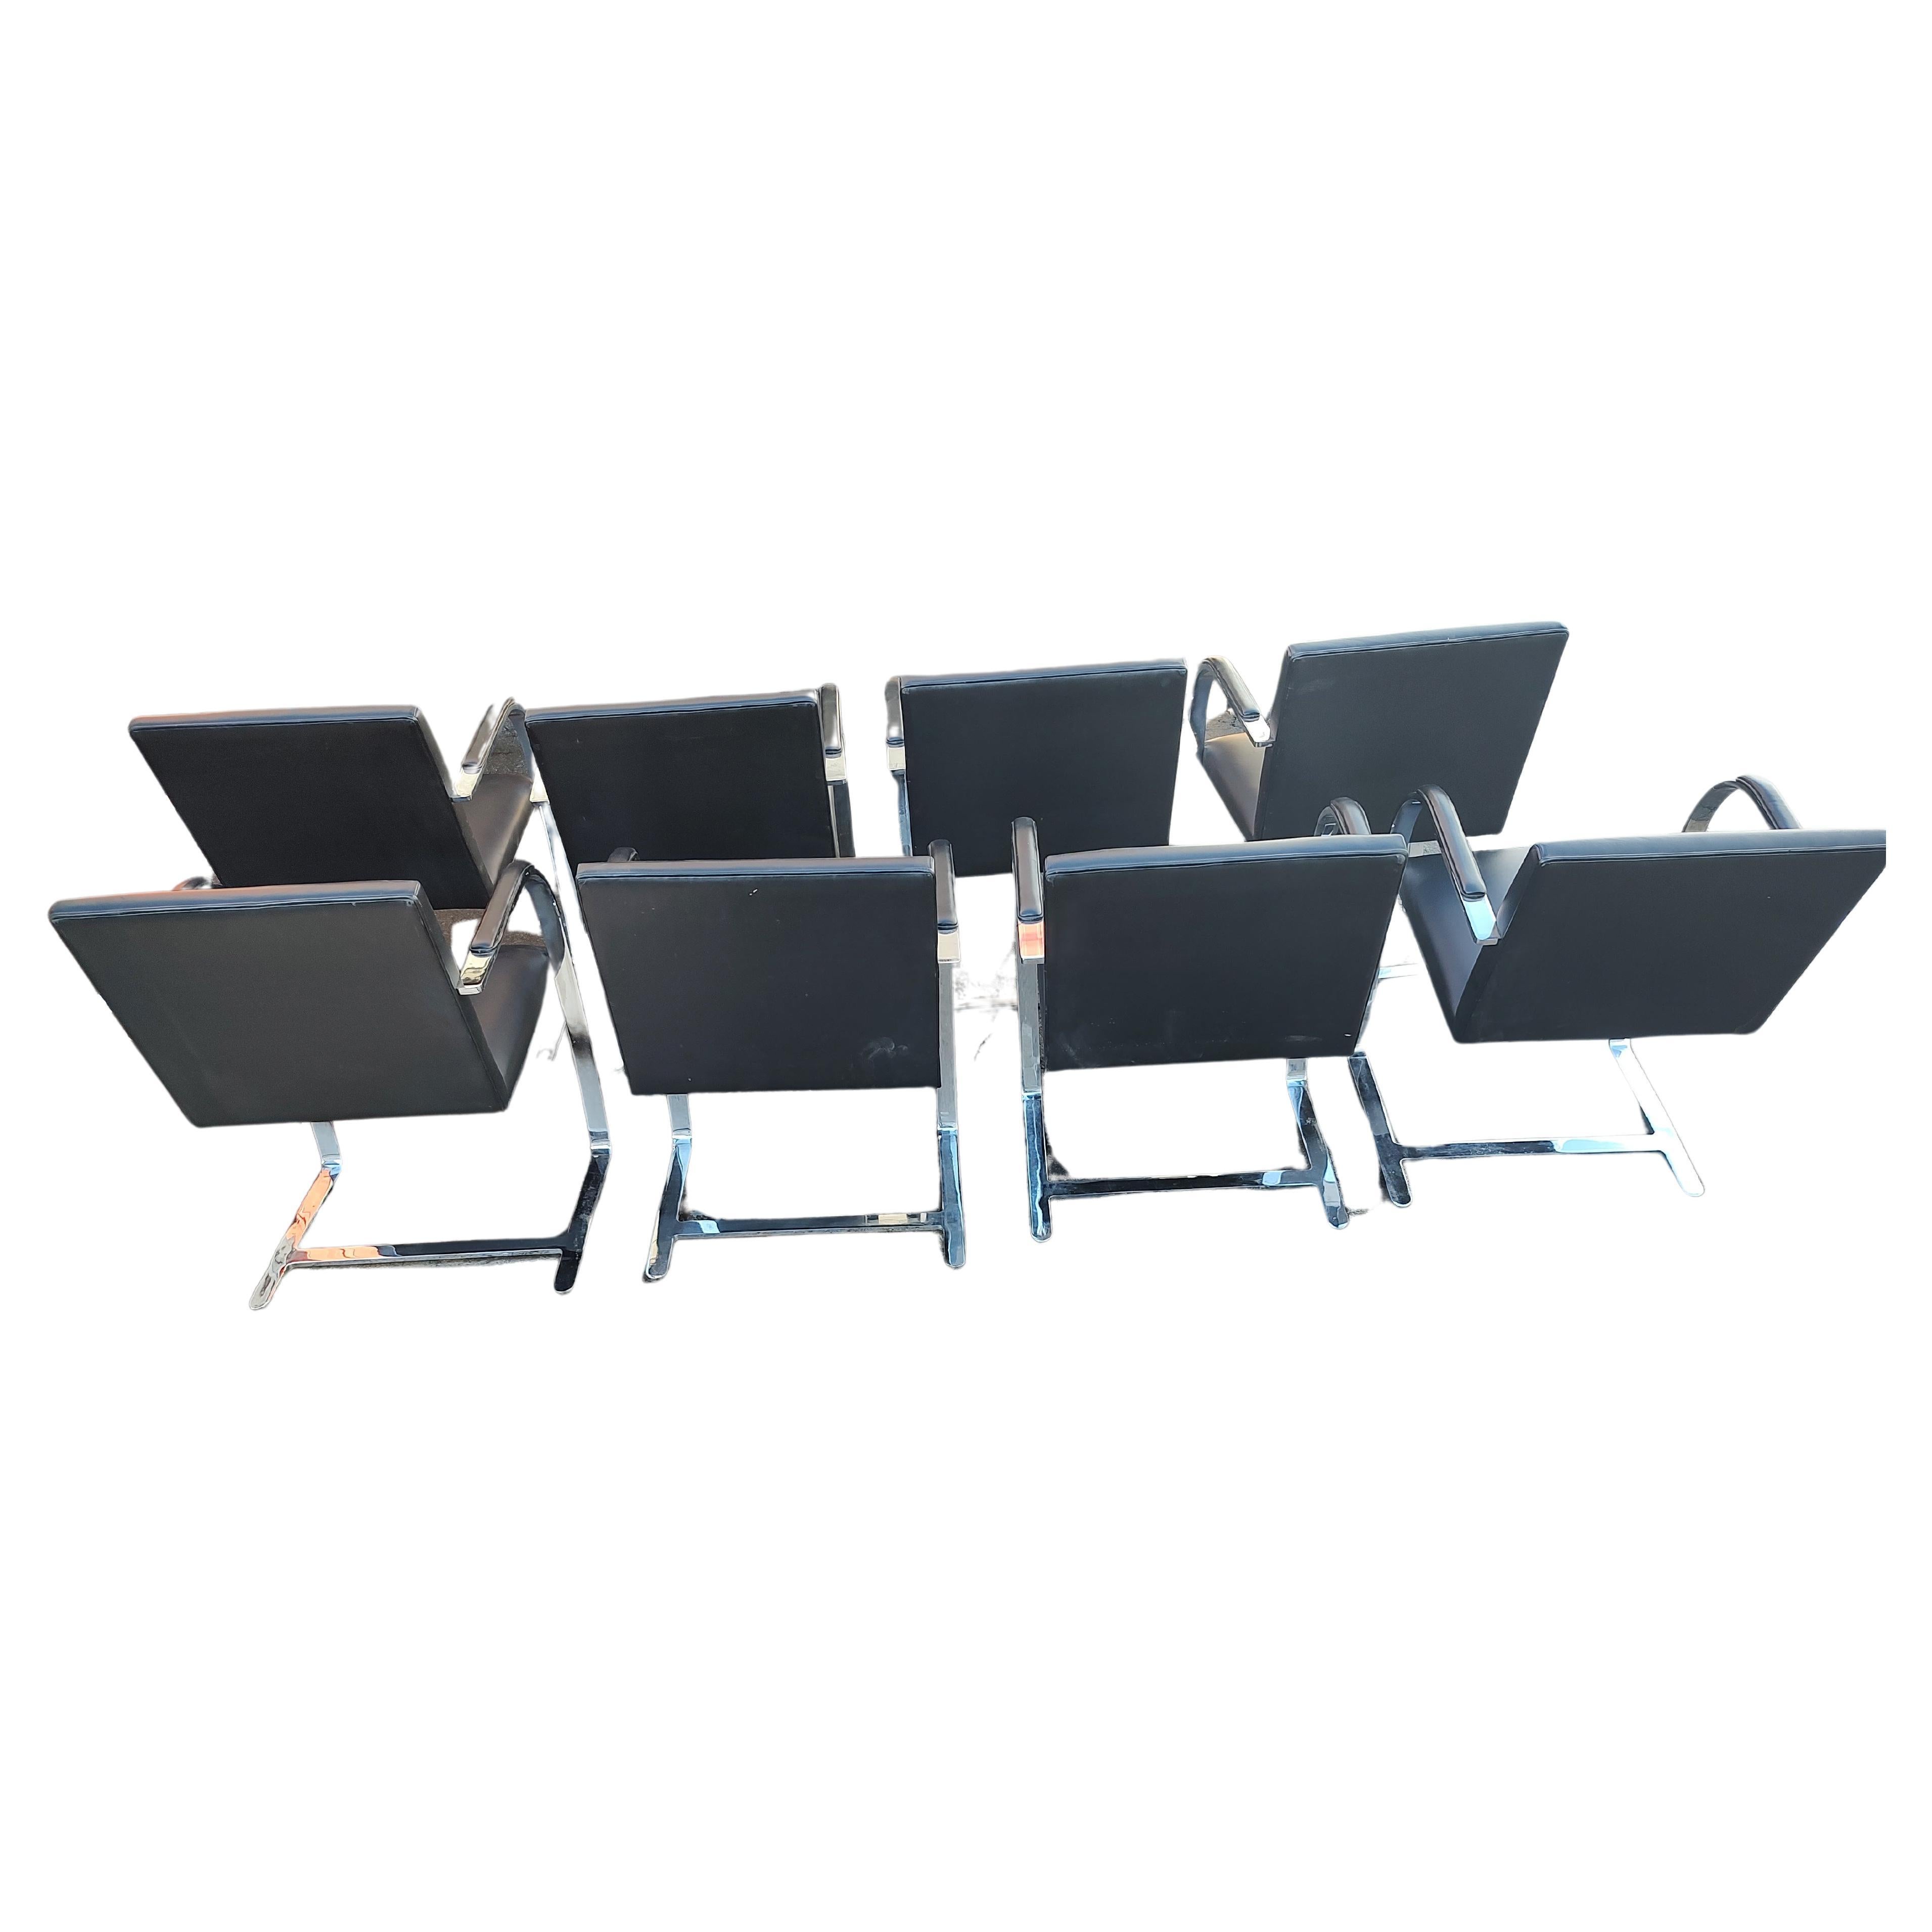 Steel Set of 8 Knoll Black Leather Flat Bar Brno Chairs by Ludwig Mies van der Rohe  For Sale